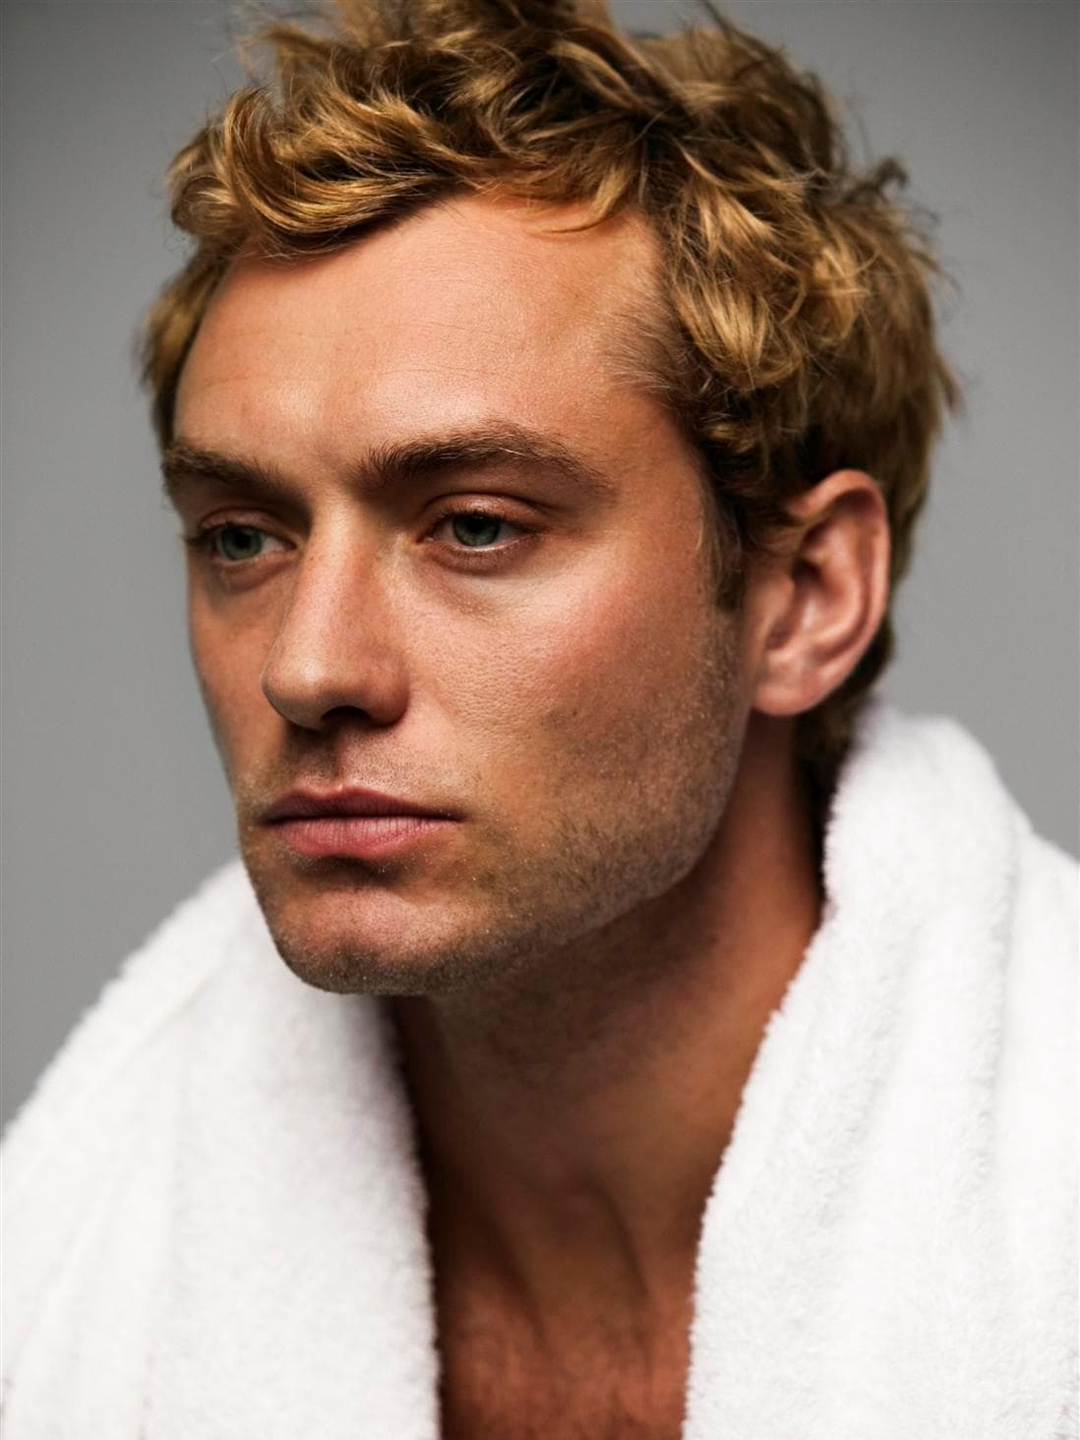 Jude Law early career